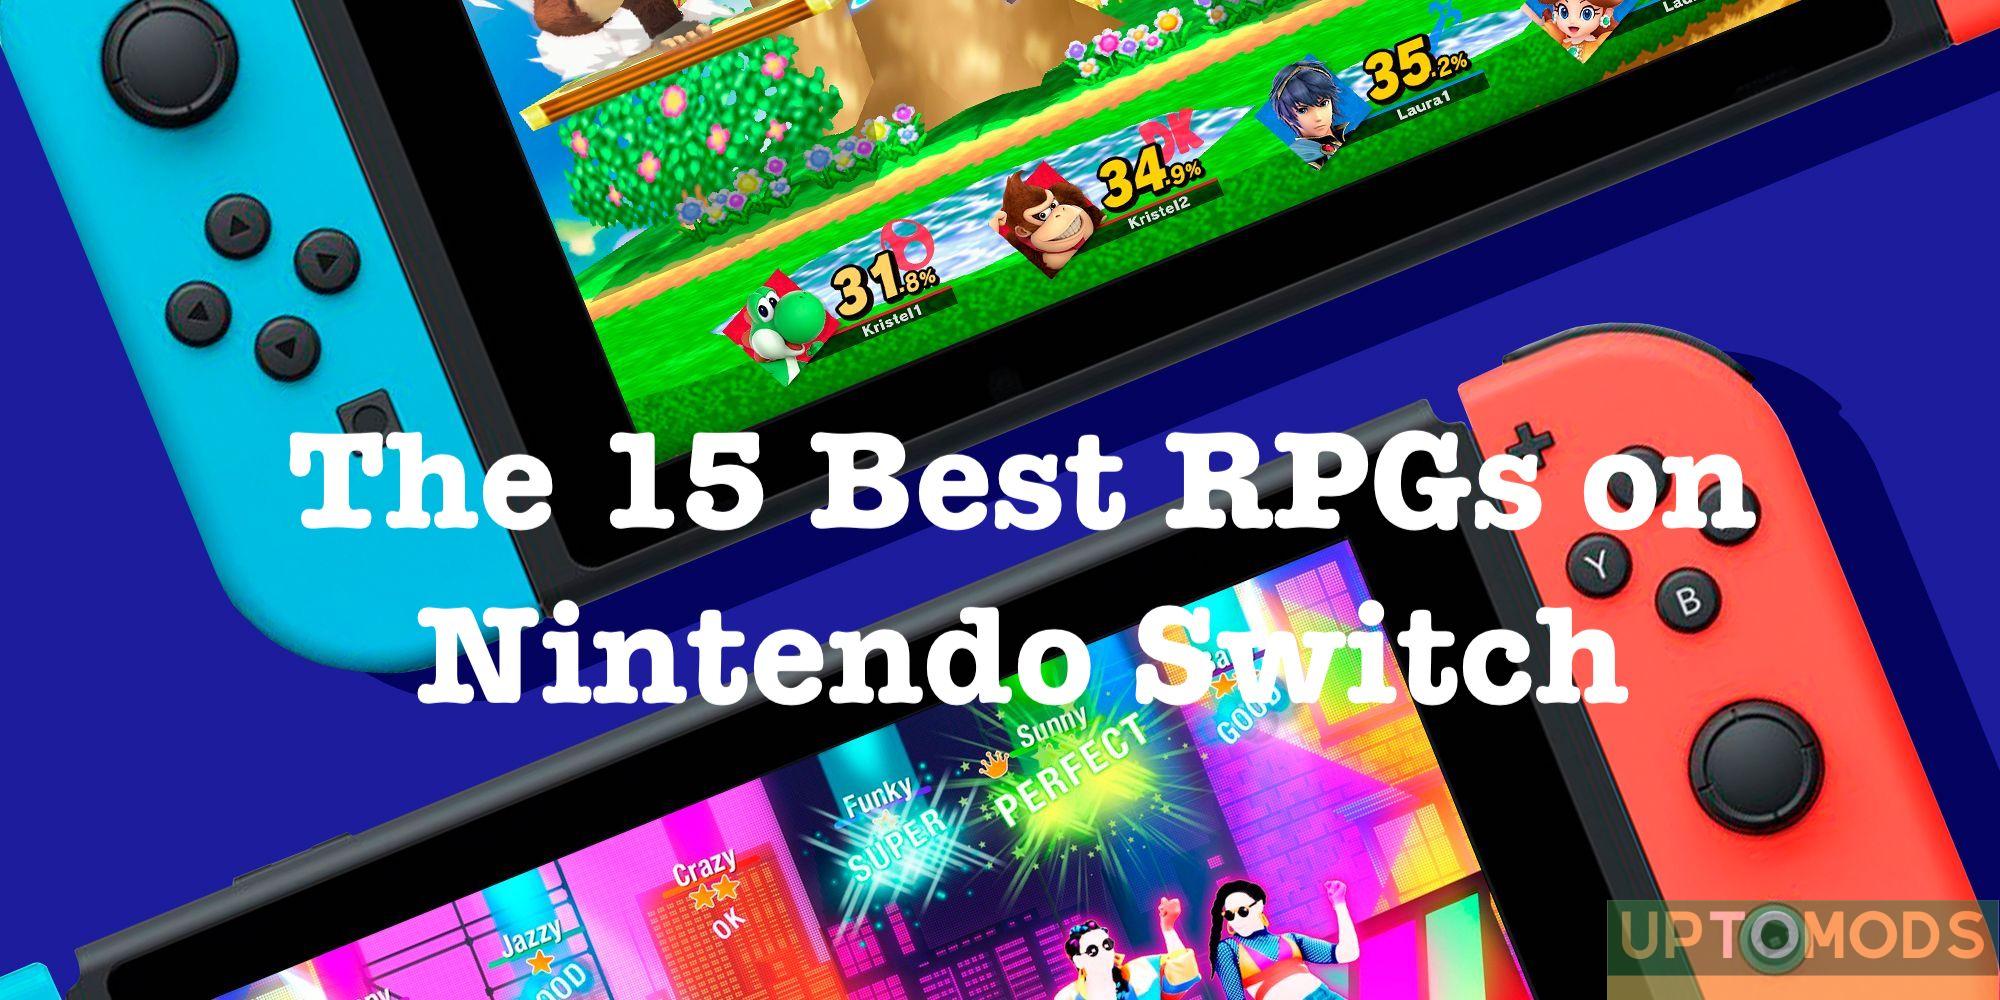 The 15 Best RPGs on Nintendo Switch